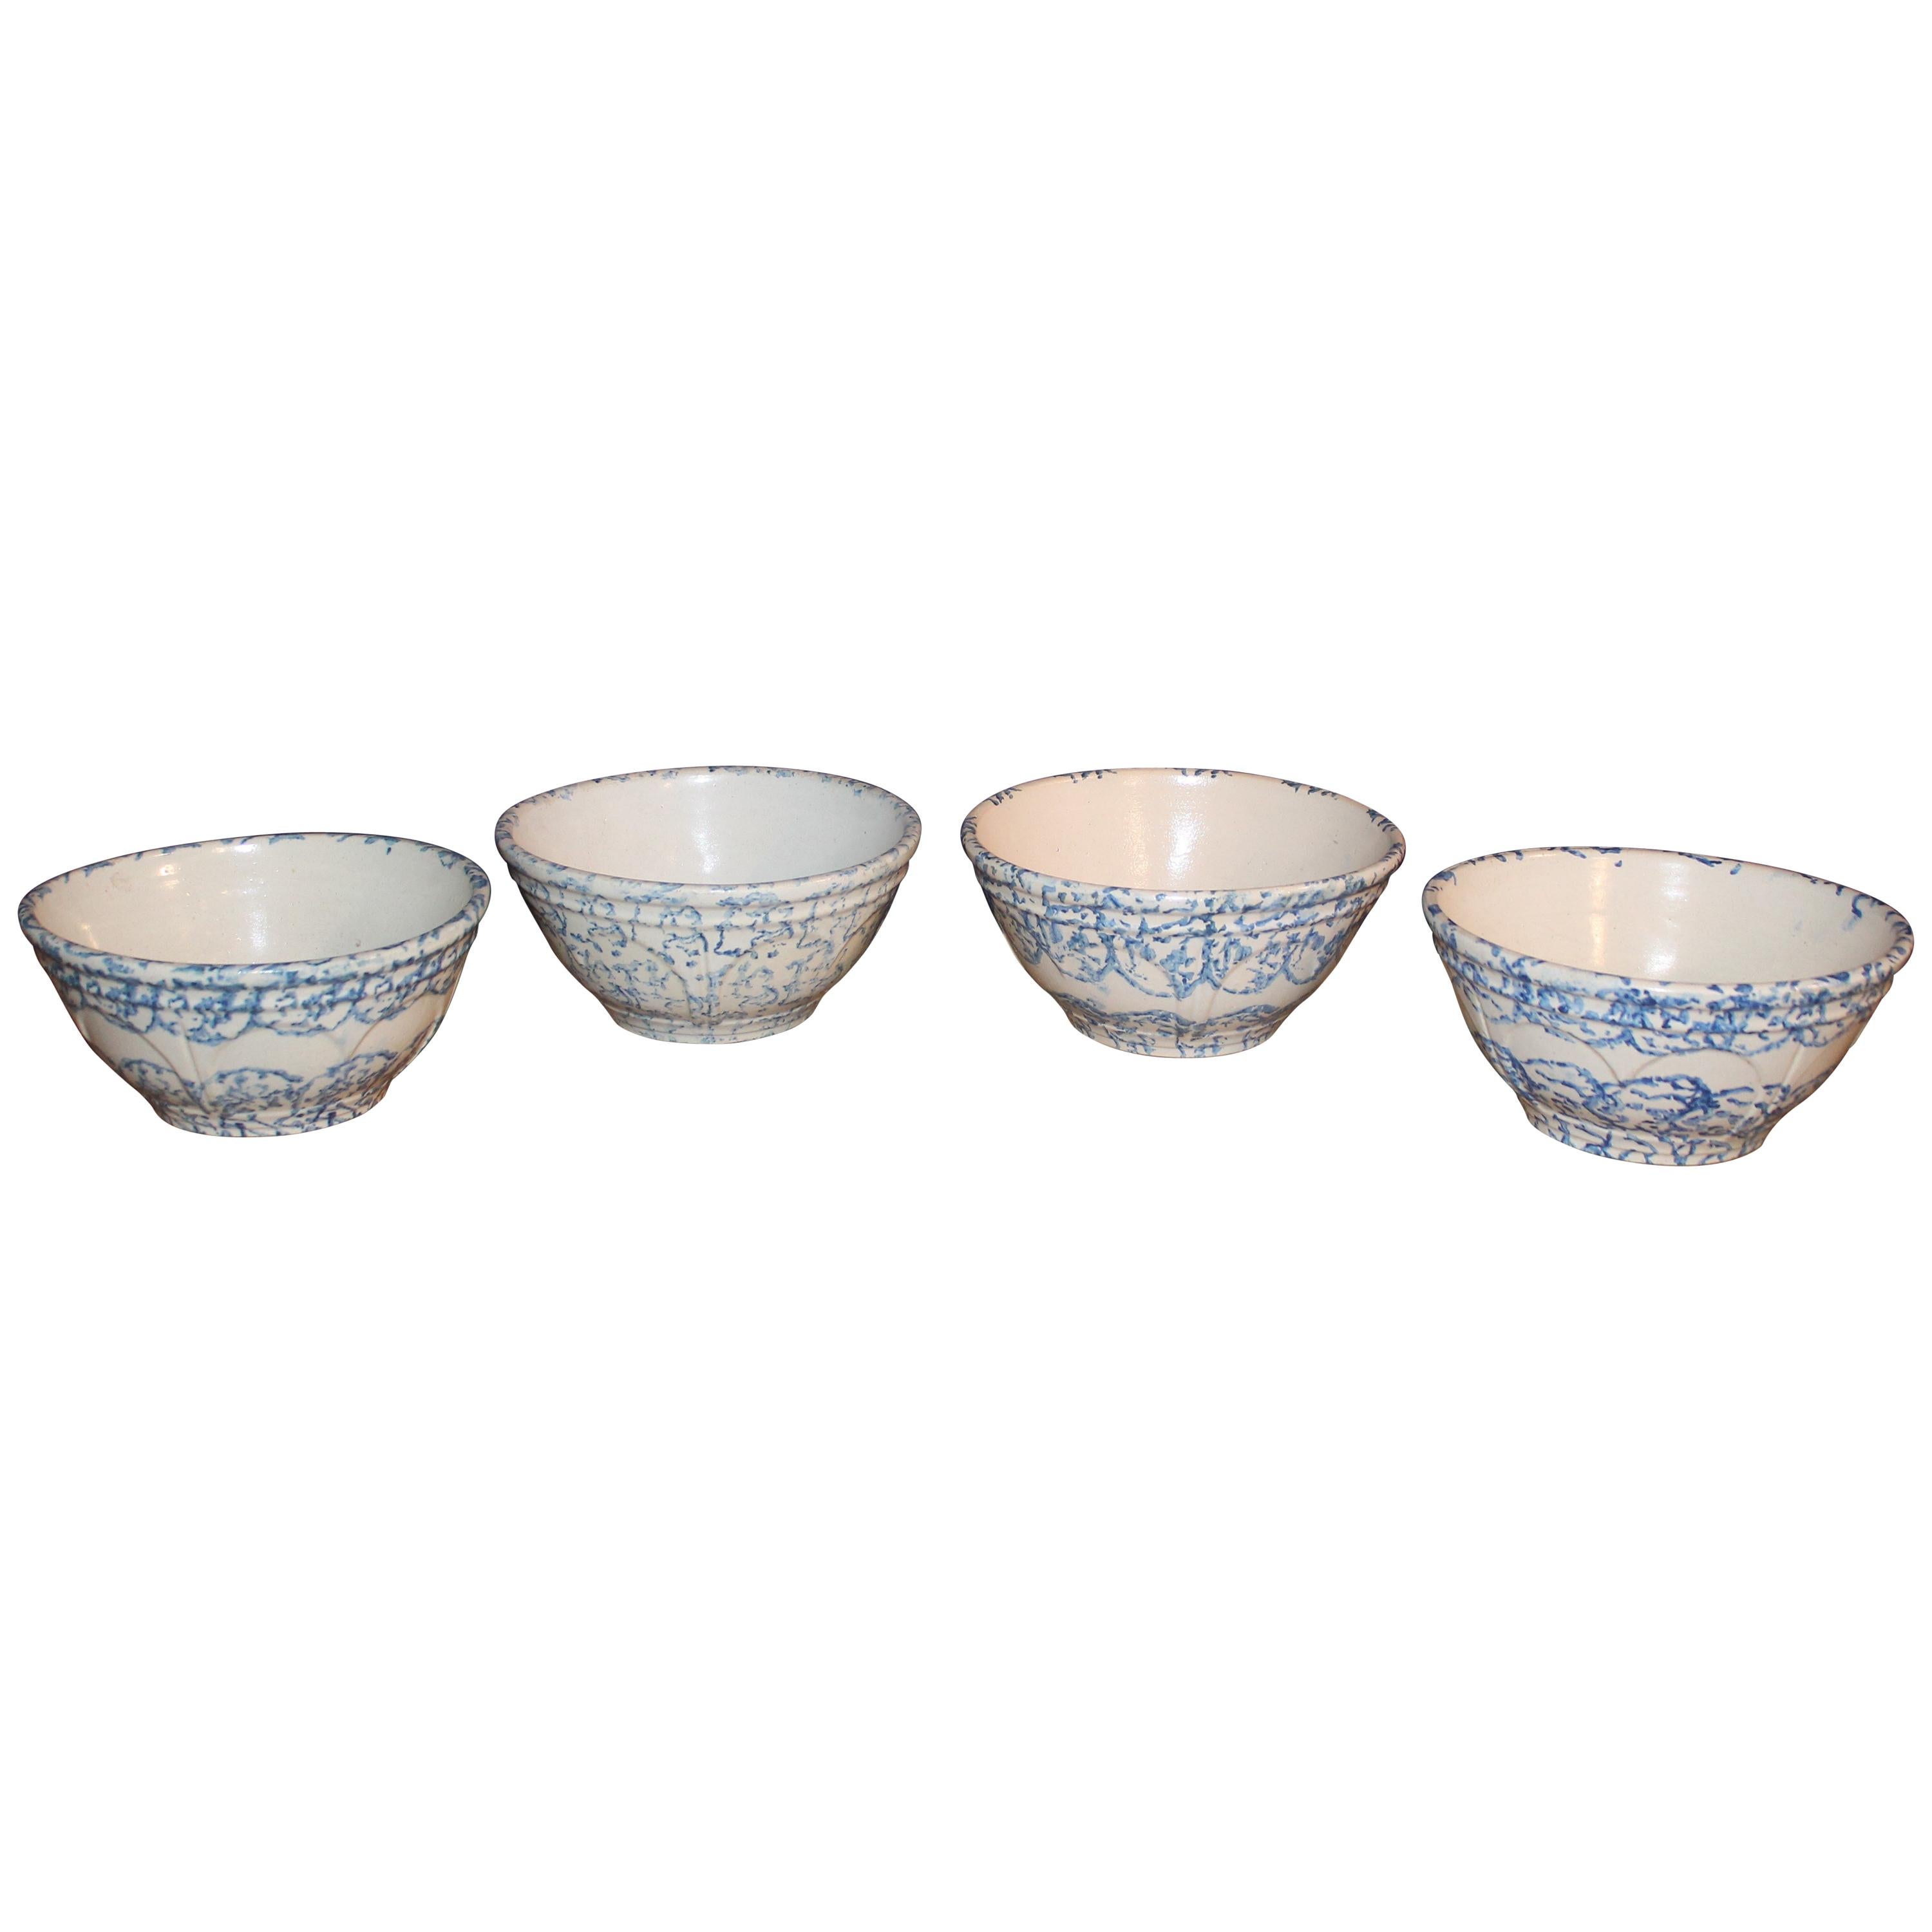 19th Century Sponge Ware Mixing Bowls / Collection of Four For Sale